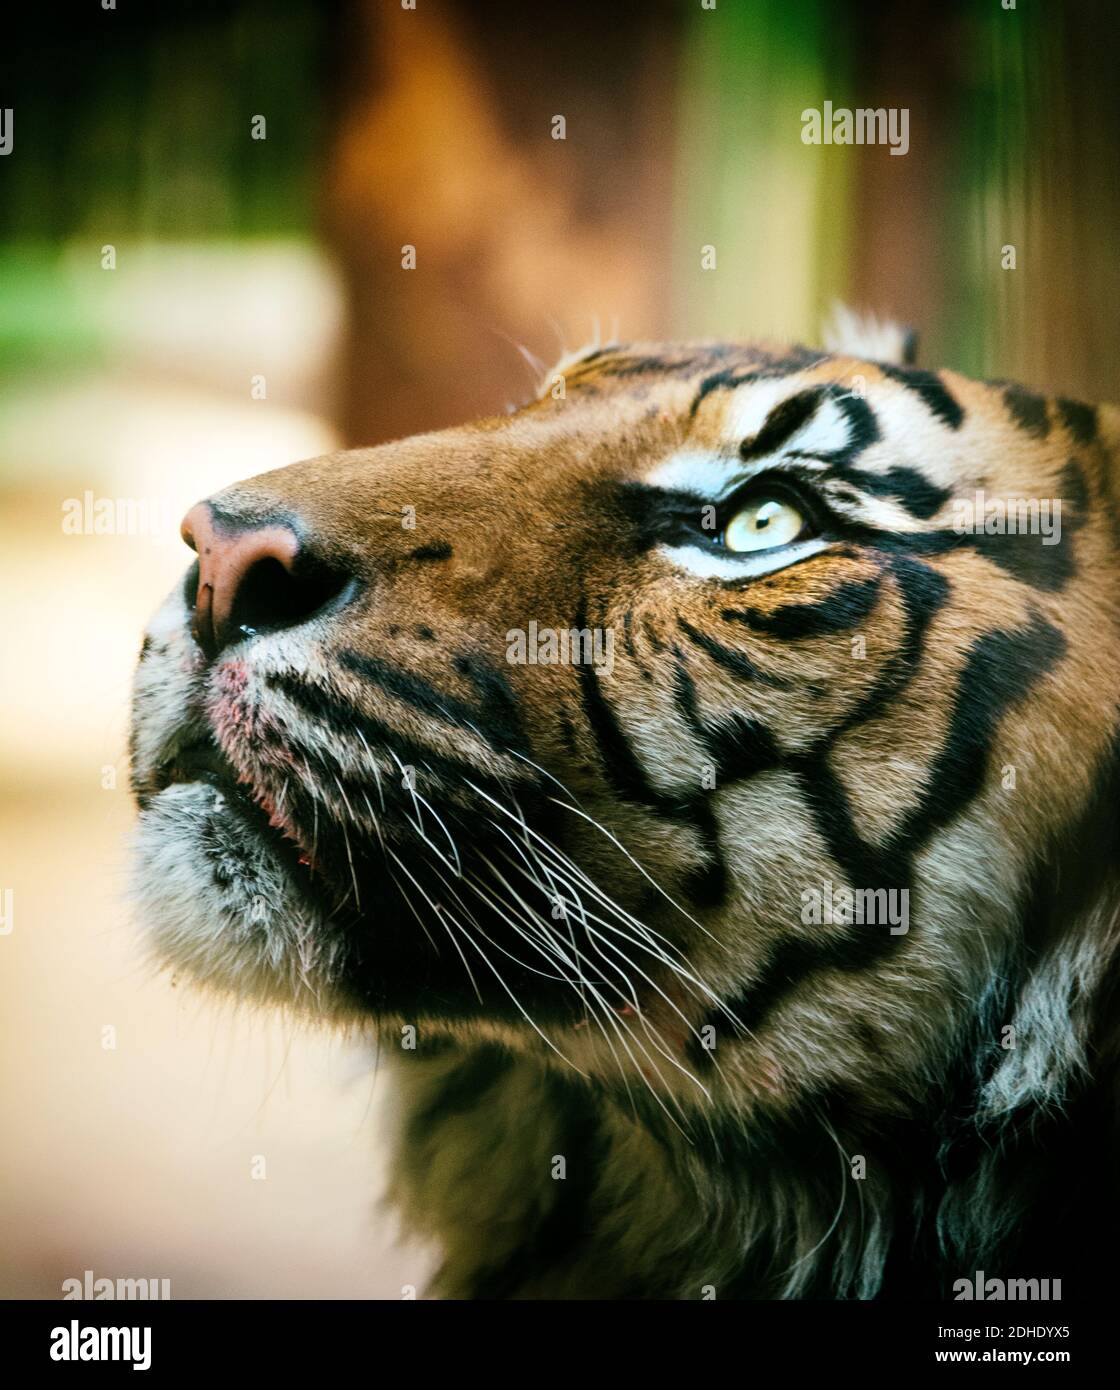 Tiger, portrait of a bengal tiger. Stock Photo